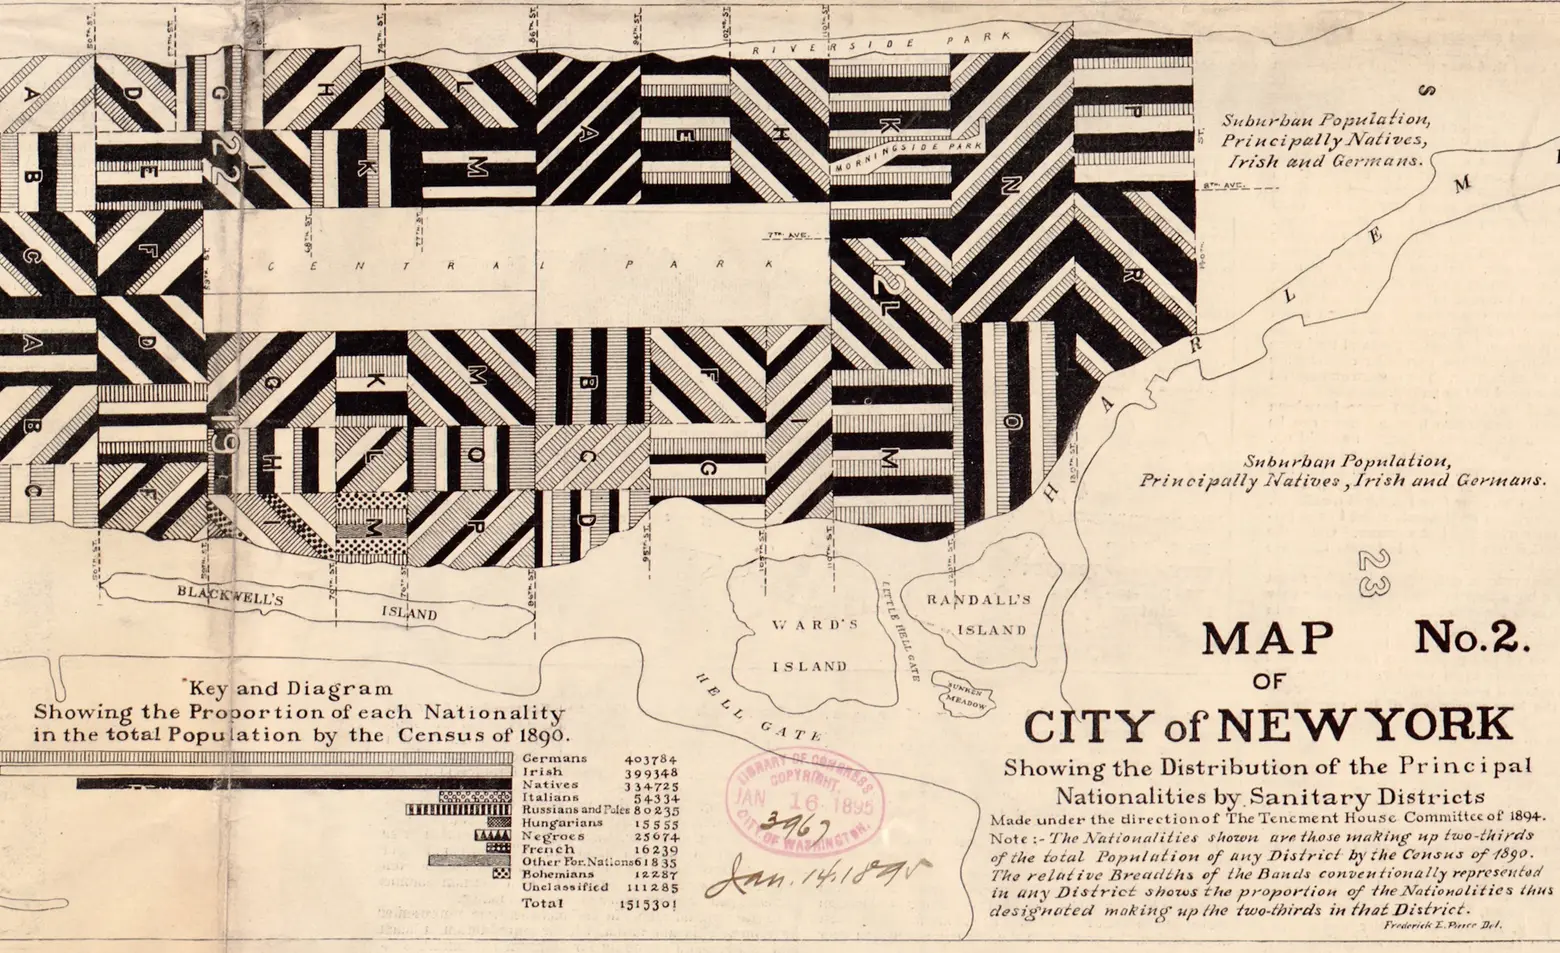 1894 maps show a Manhattan densely populated with immigrants